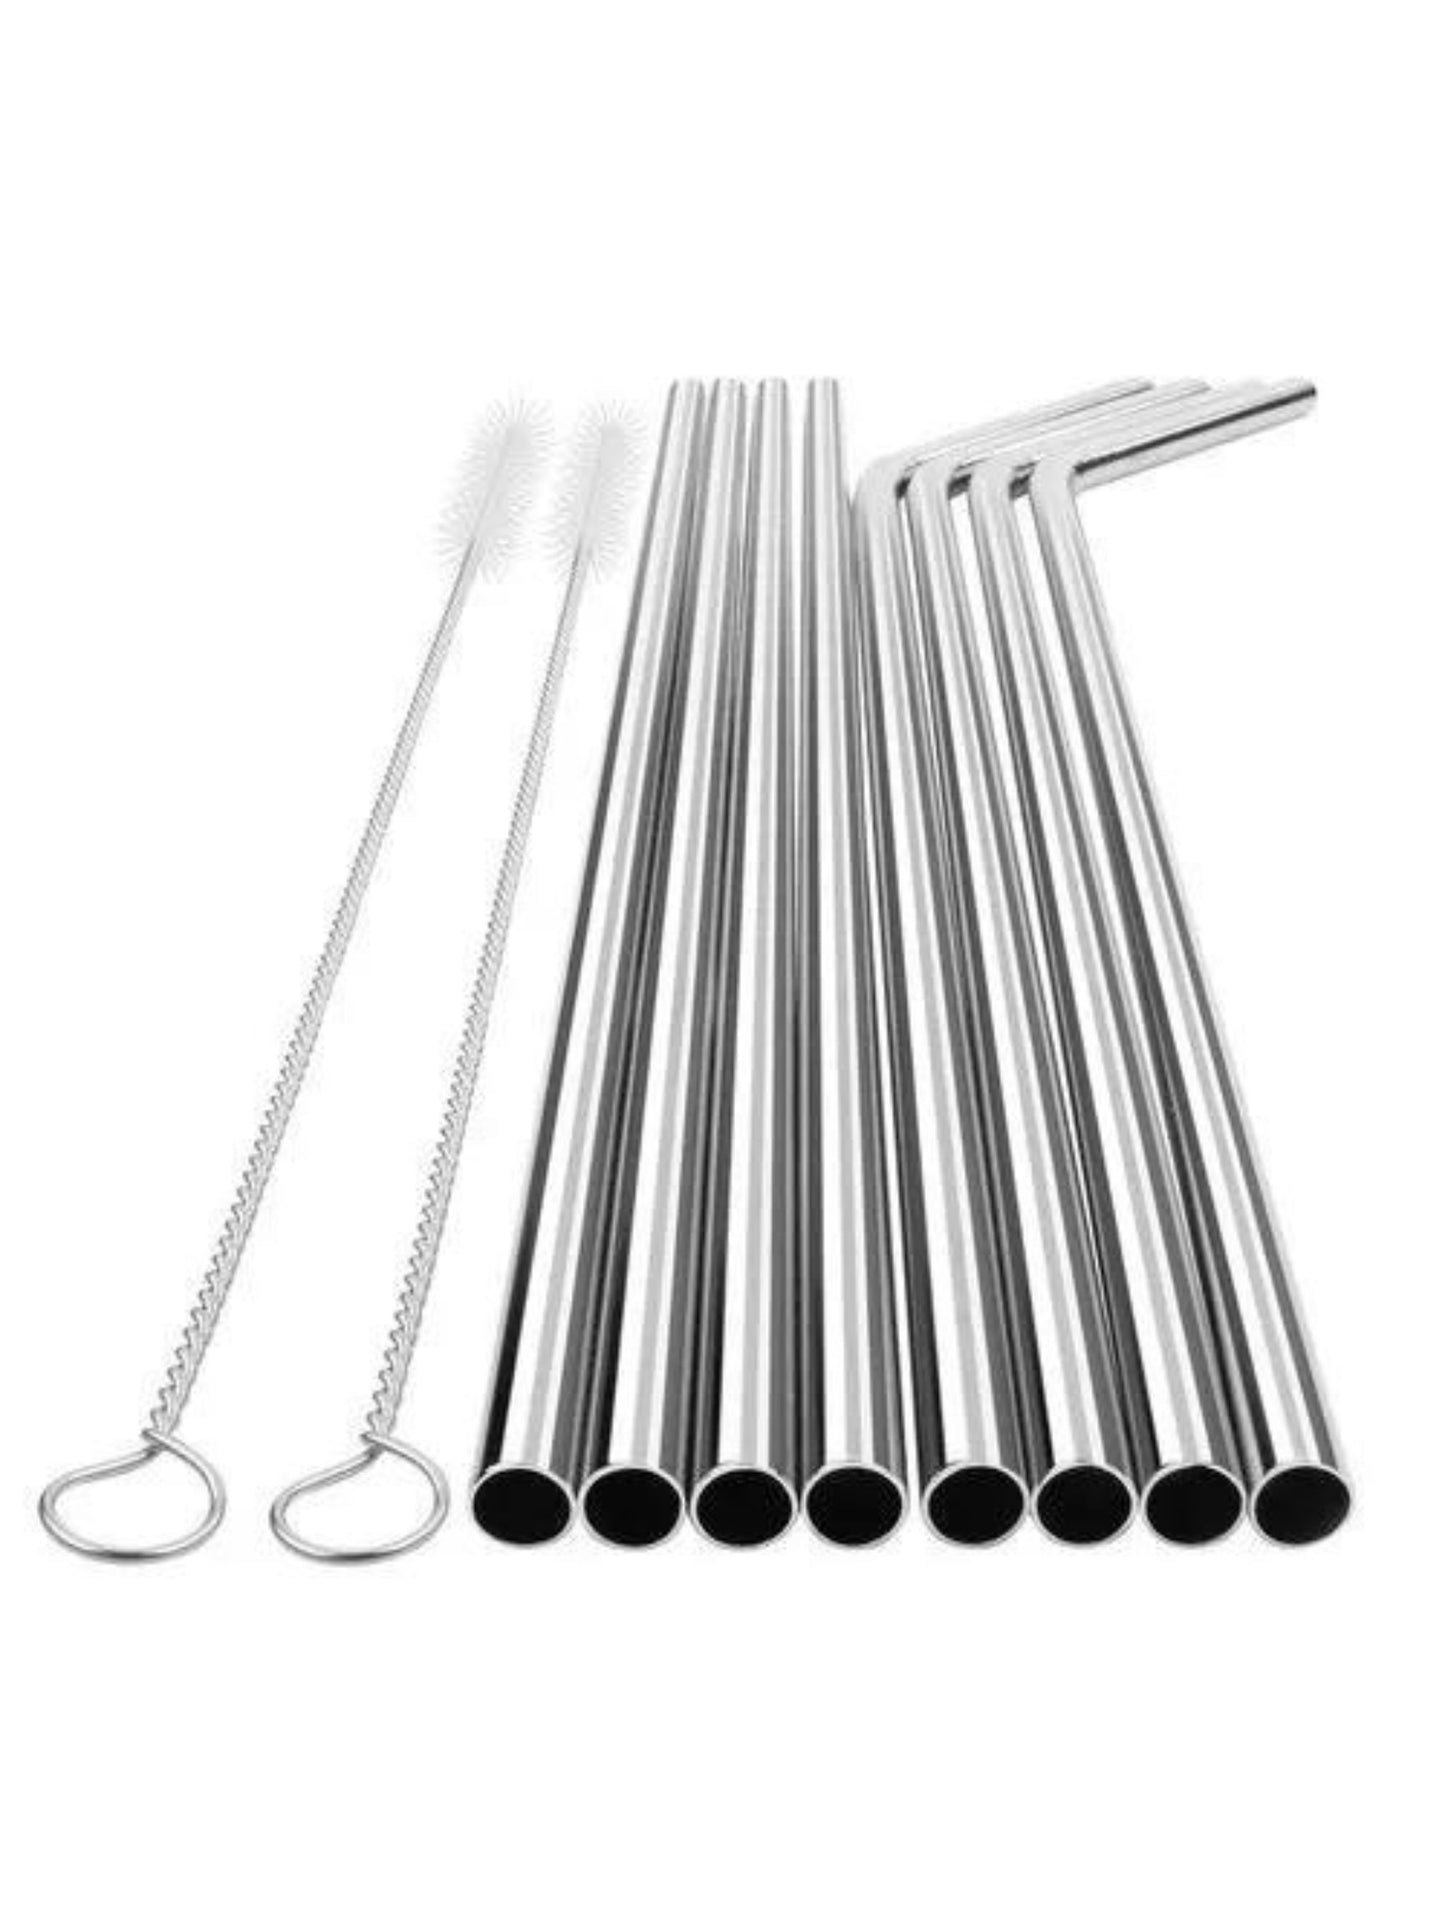 18-Pack Reusable Stainless Steel Straws with Soft Silicone Tips, Urekt 8.5  and 10.5 Long Metal Drinking Straw Set with 2pcs 0.4“ Extra Wide Boba  Straws, 4 Cleaning Brushes Included - Yahoo Shopping